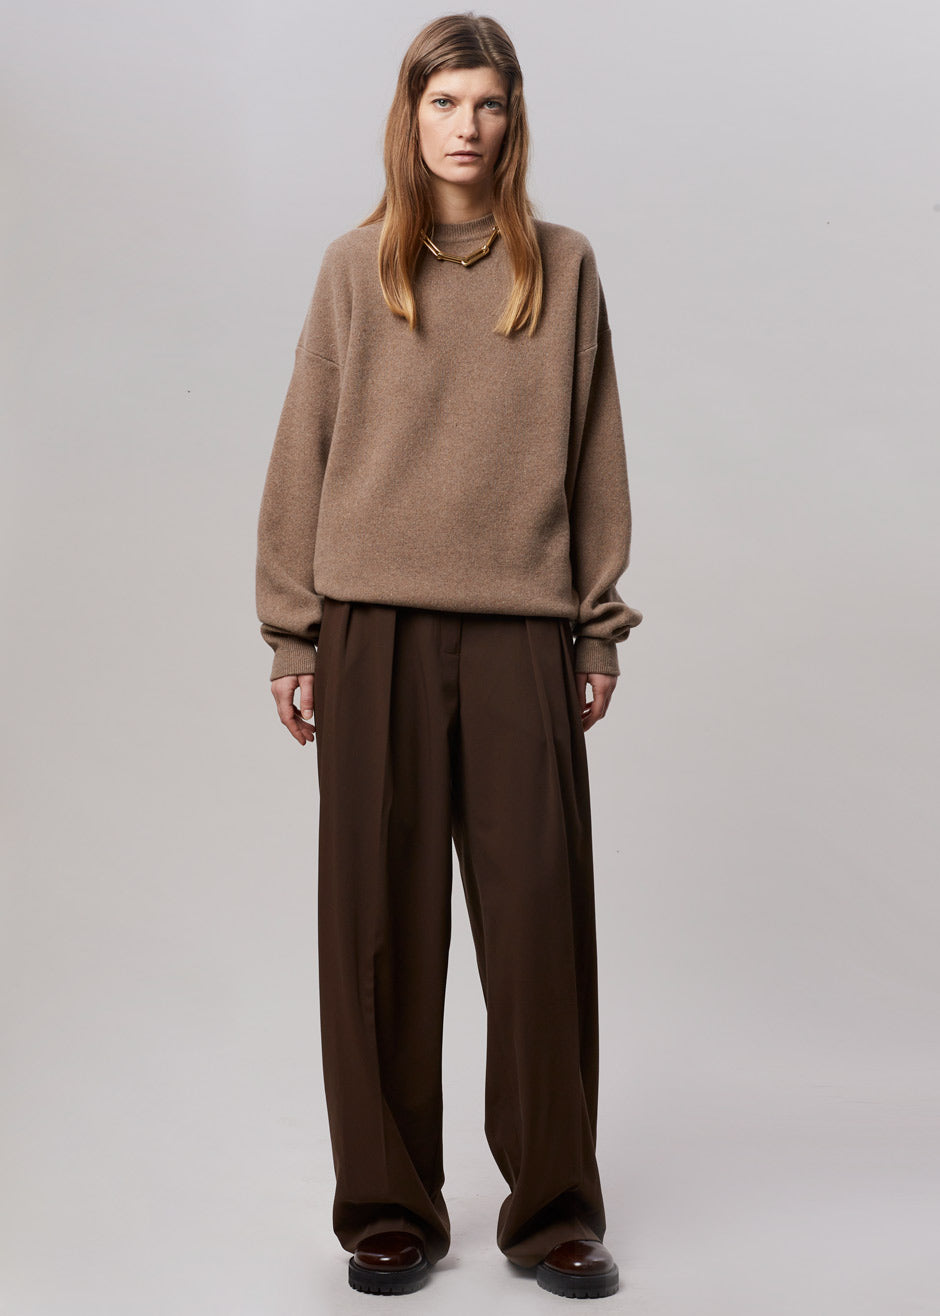 Hadrien Italian Recycled Cashmere Sweater - Taupe – Frankie Shop Europe